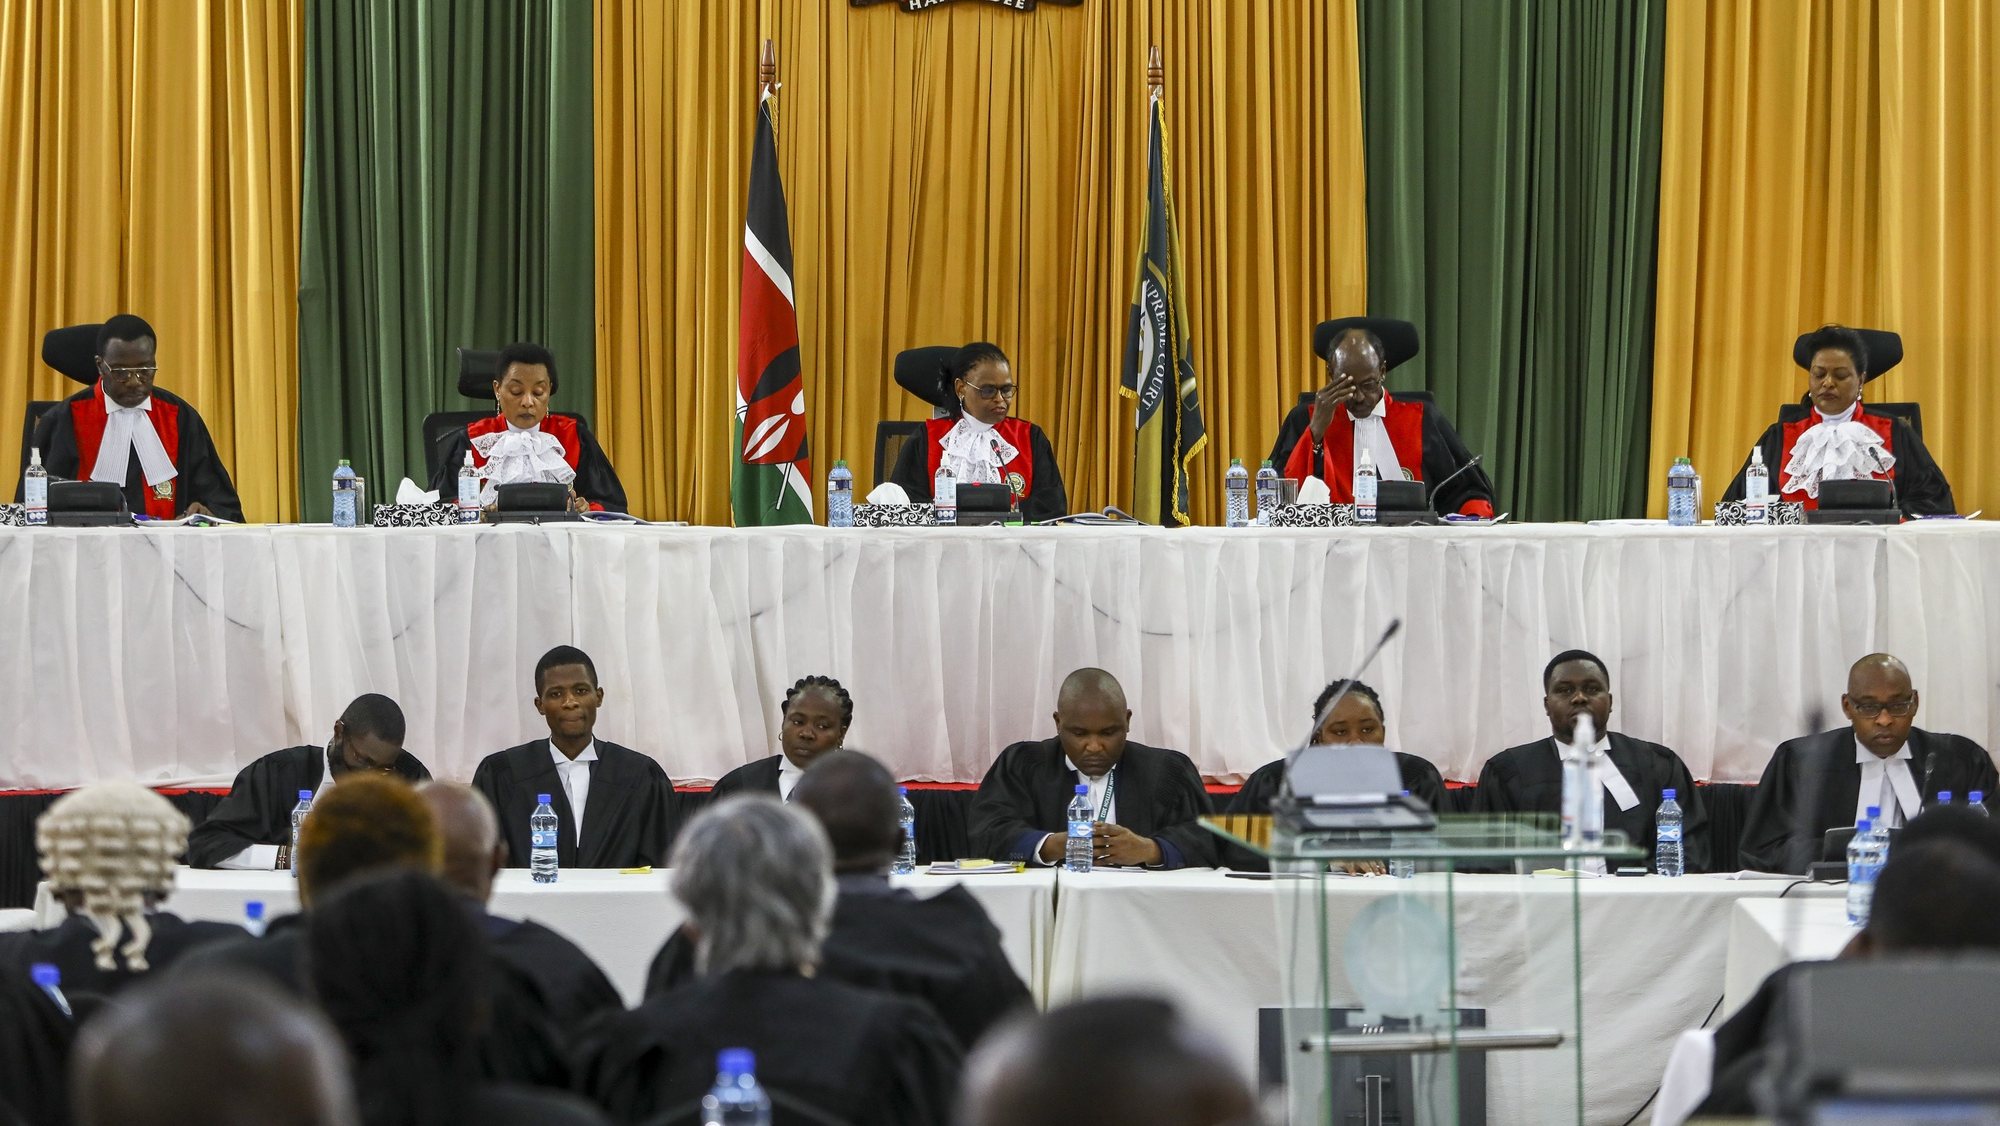 epa10160950 Kenya&#039;s Supreme Court judges (L-R) Justice Dr Smokin Wanjala, Deputy Chief Justice Philomena Mwilu, Chief Justice Martha Koome, Justice Mohamed Khadhar Ibrahim and Justice Njoki Susanna Ndung&#039;u during ruling session on petition filed by the opposition leader Raila Odinga challenging the outcome of the presidential elections, at the Milimani Law Courts in Nairobi, Kenya, 05 September 2022. Odinga filed a petition claiming that &#039;widespread malpractices&#039; occured during the 09 August presidential elections, in which Deputy President William Ruto was declared the President-elect.  EPA/DANIEL IRUNGU